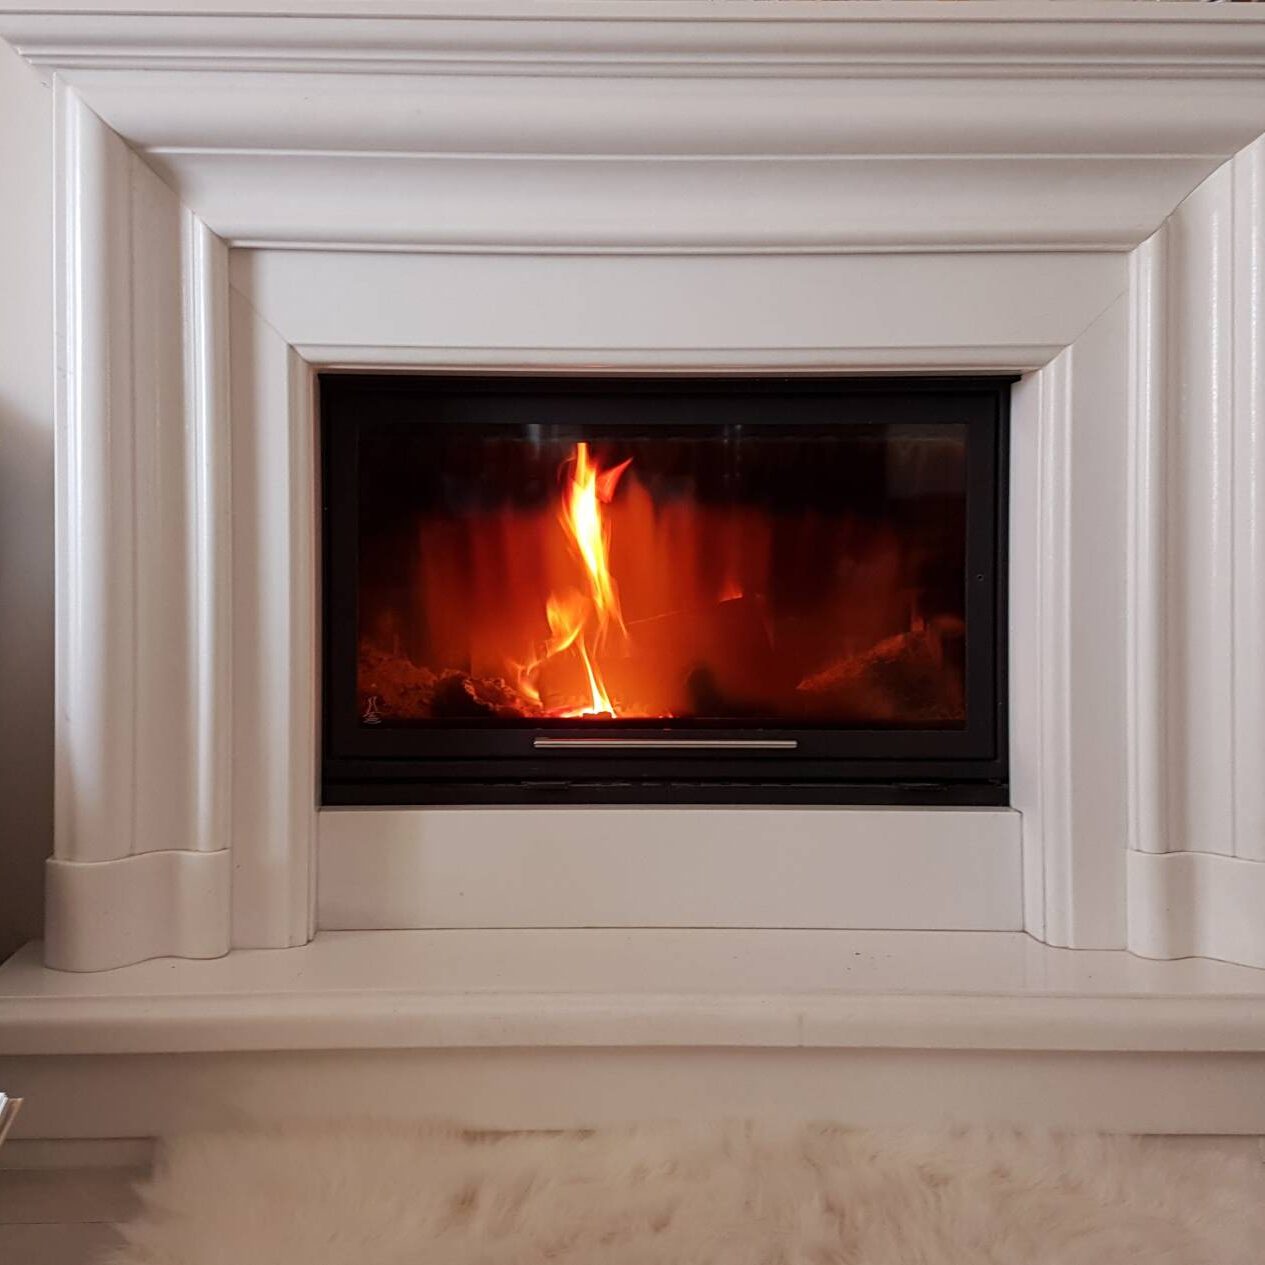 A fire burning in the fireplace of a white room.